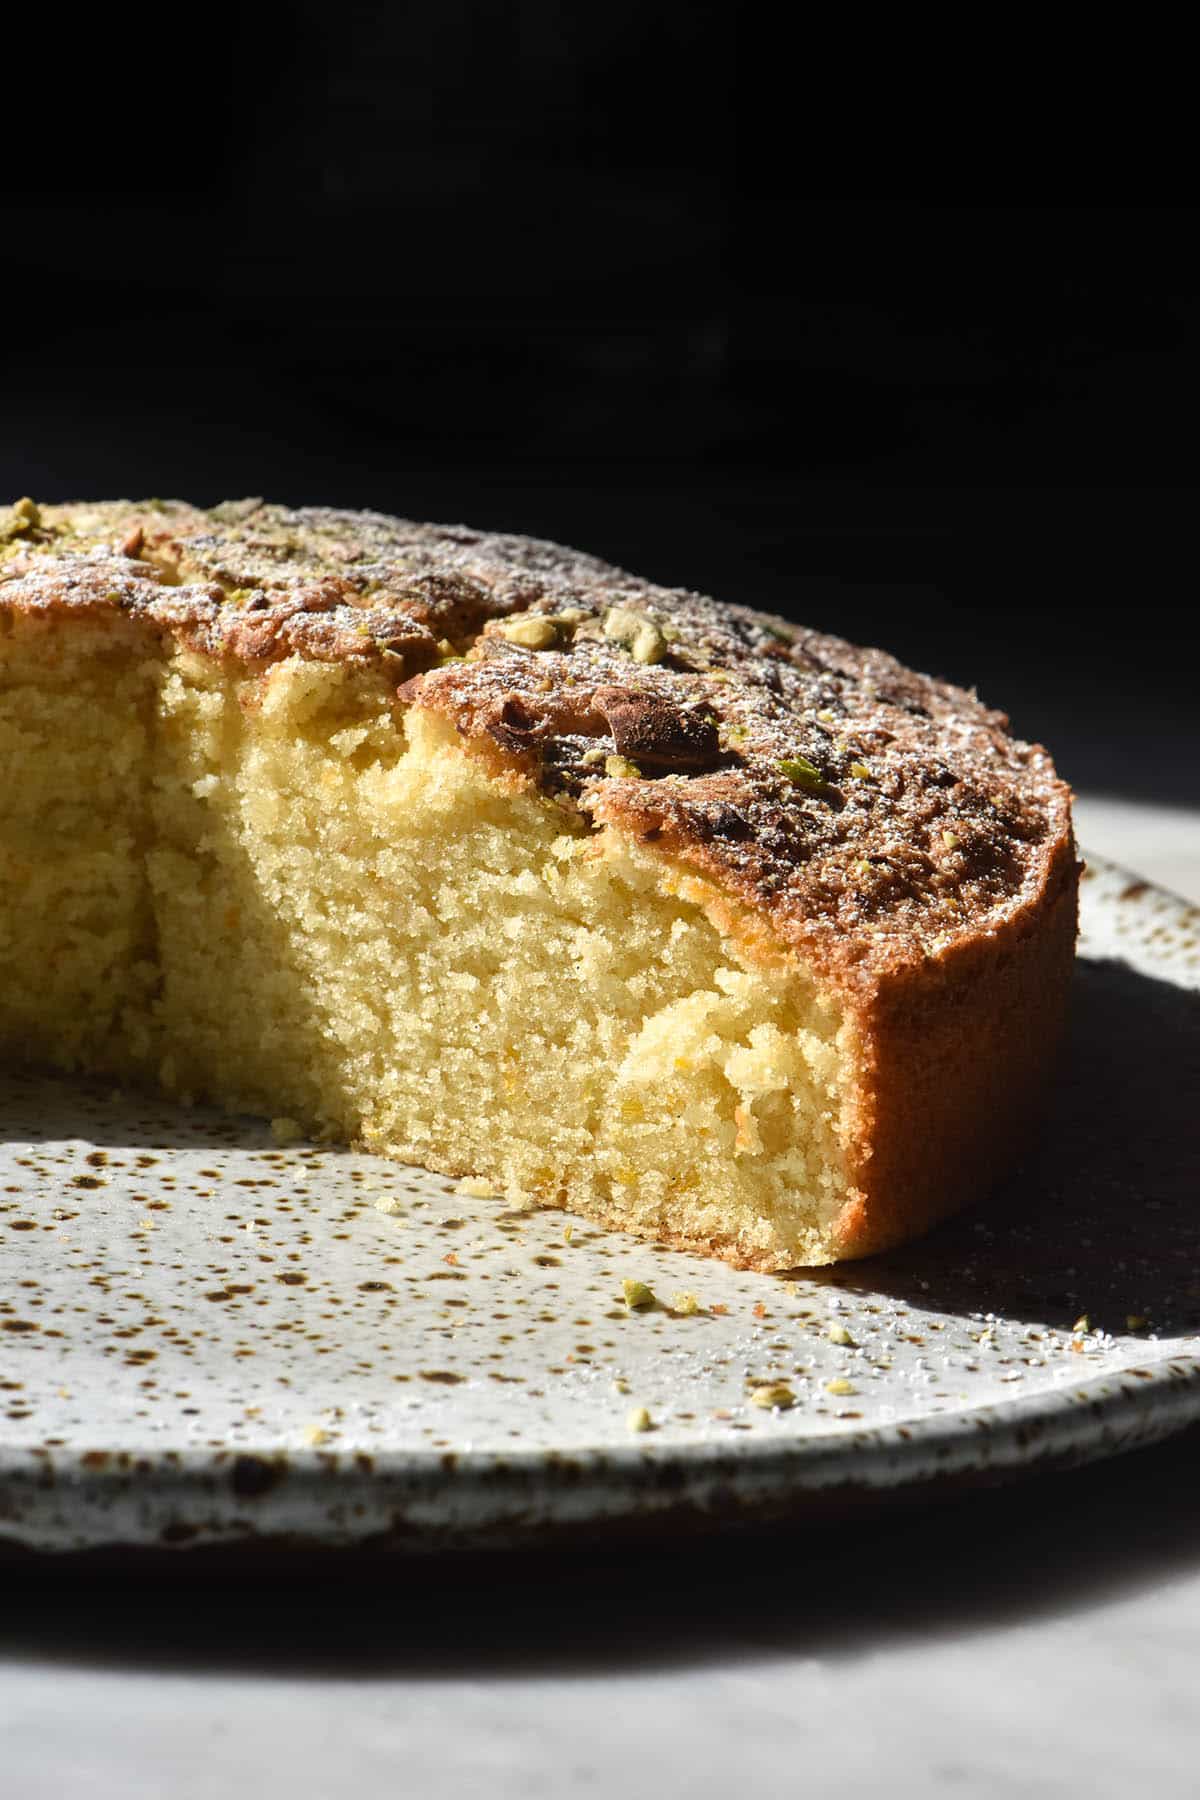 A side on brightly lit view of a gluten free olive oil cake sliced to reveal a pillowy golden crumb. The cake sits on a white speckled plate against a contrasted dark backdrop. 